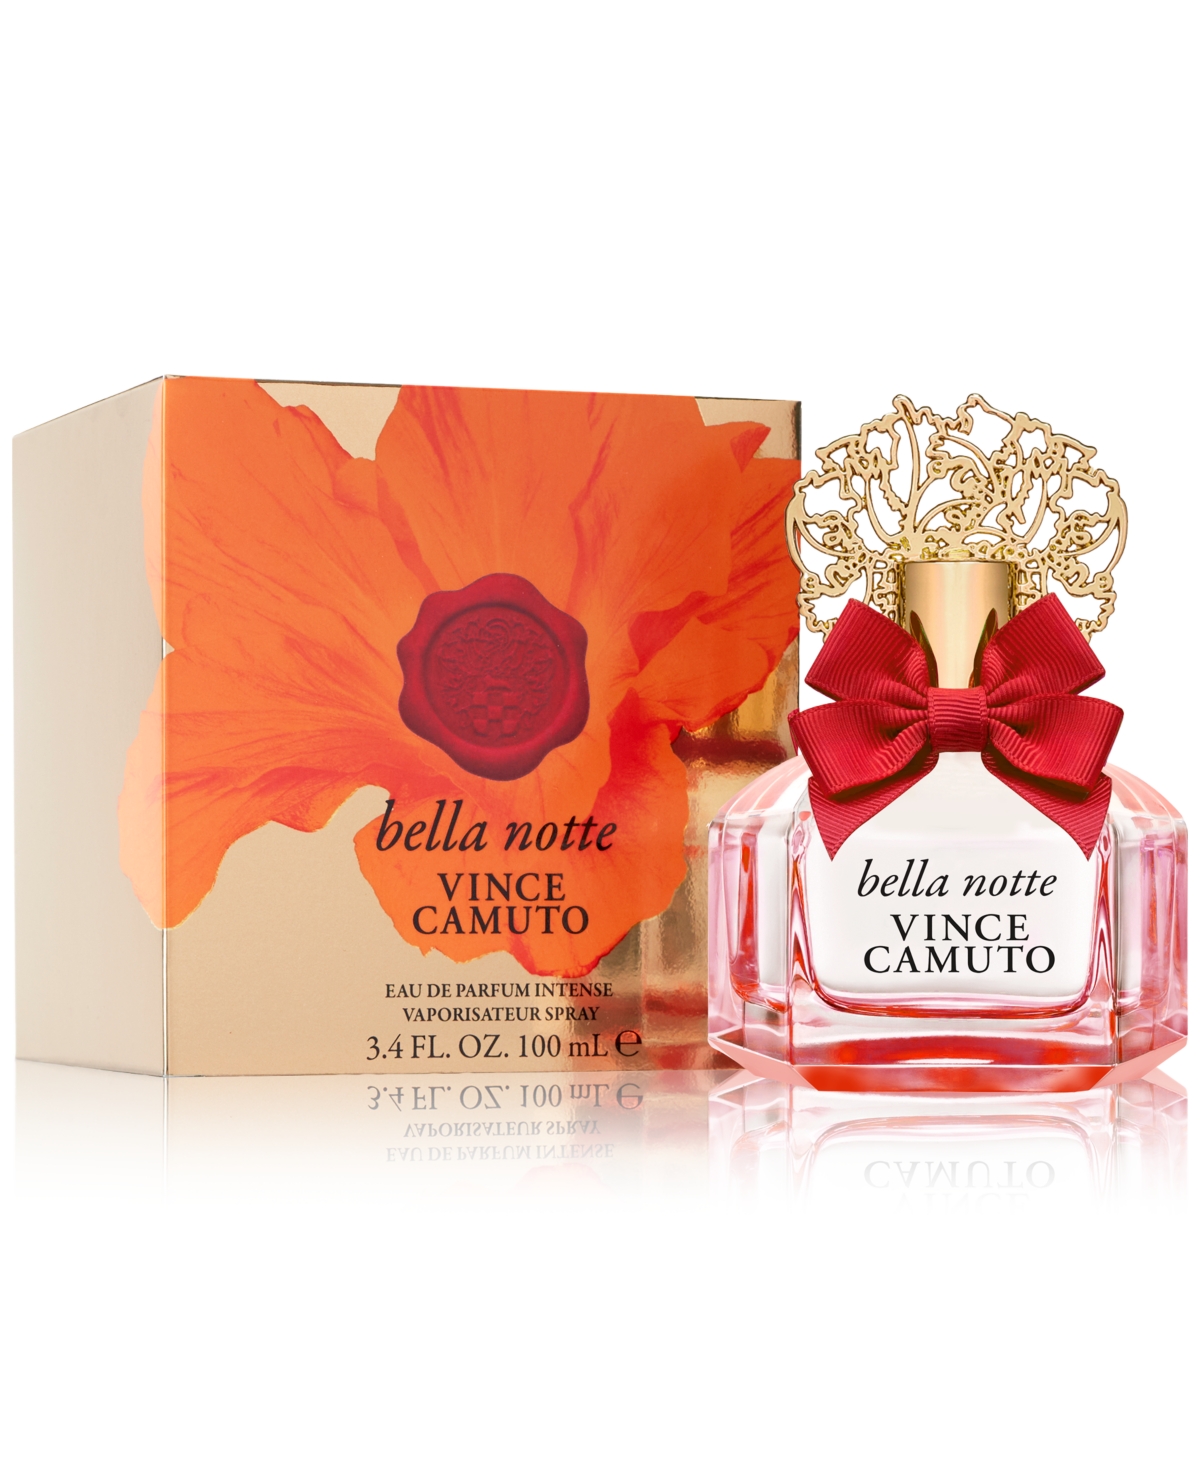 VINCE CAMUTO CIAO by Vince Camuto 3.4 OZ EAU DE PARFUM SPRAY NEW in Box for  608940568224